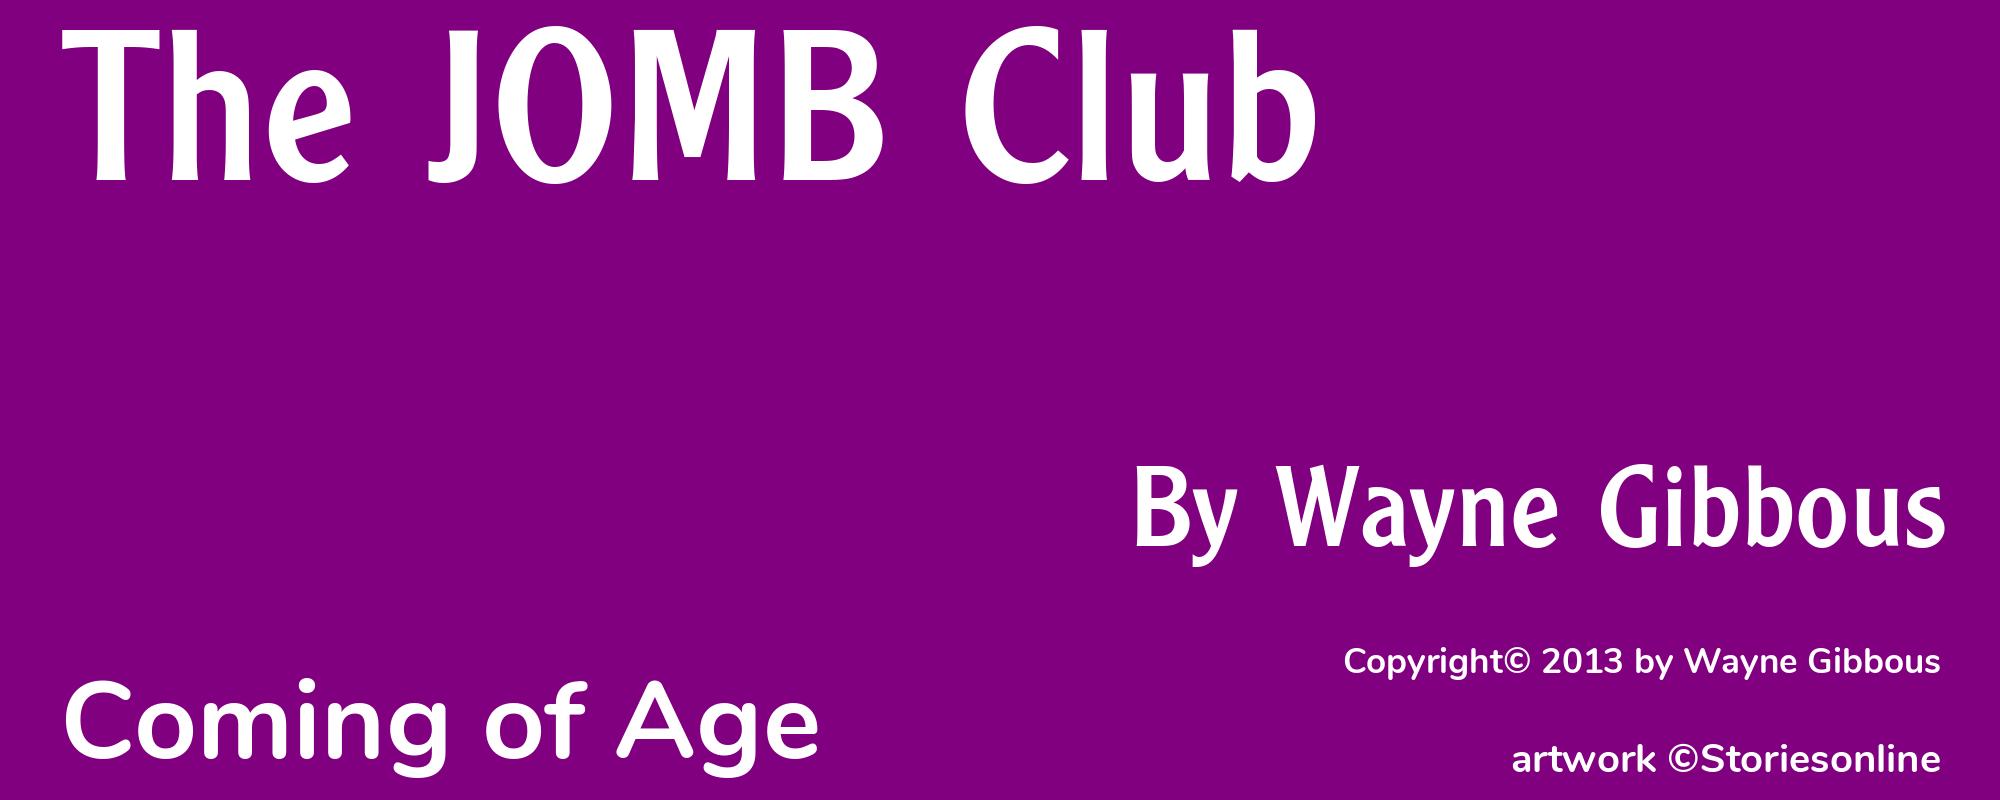 The JOMB Club - Cover